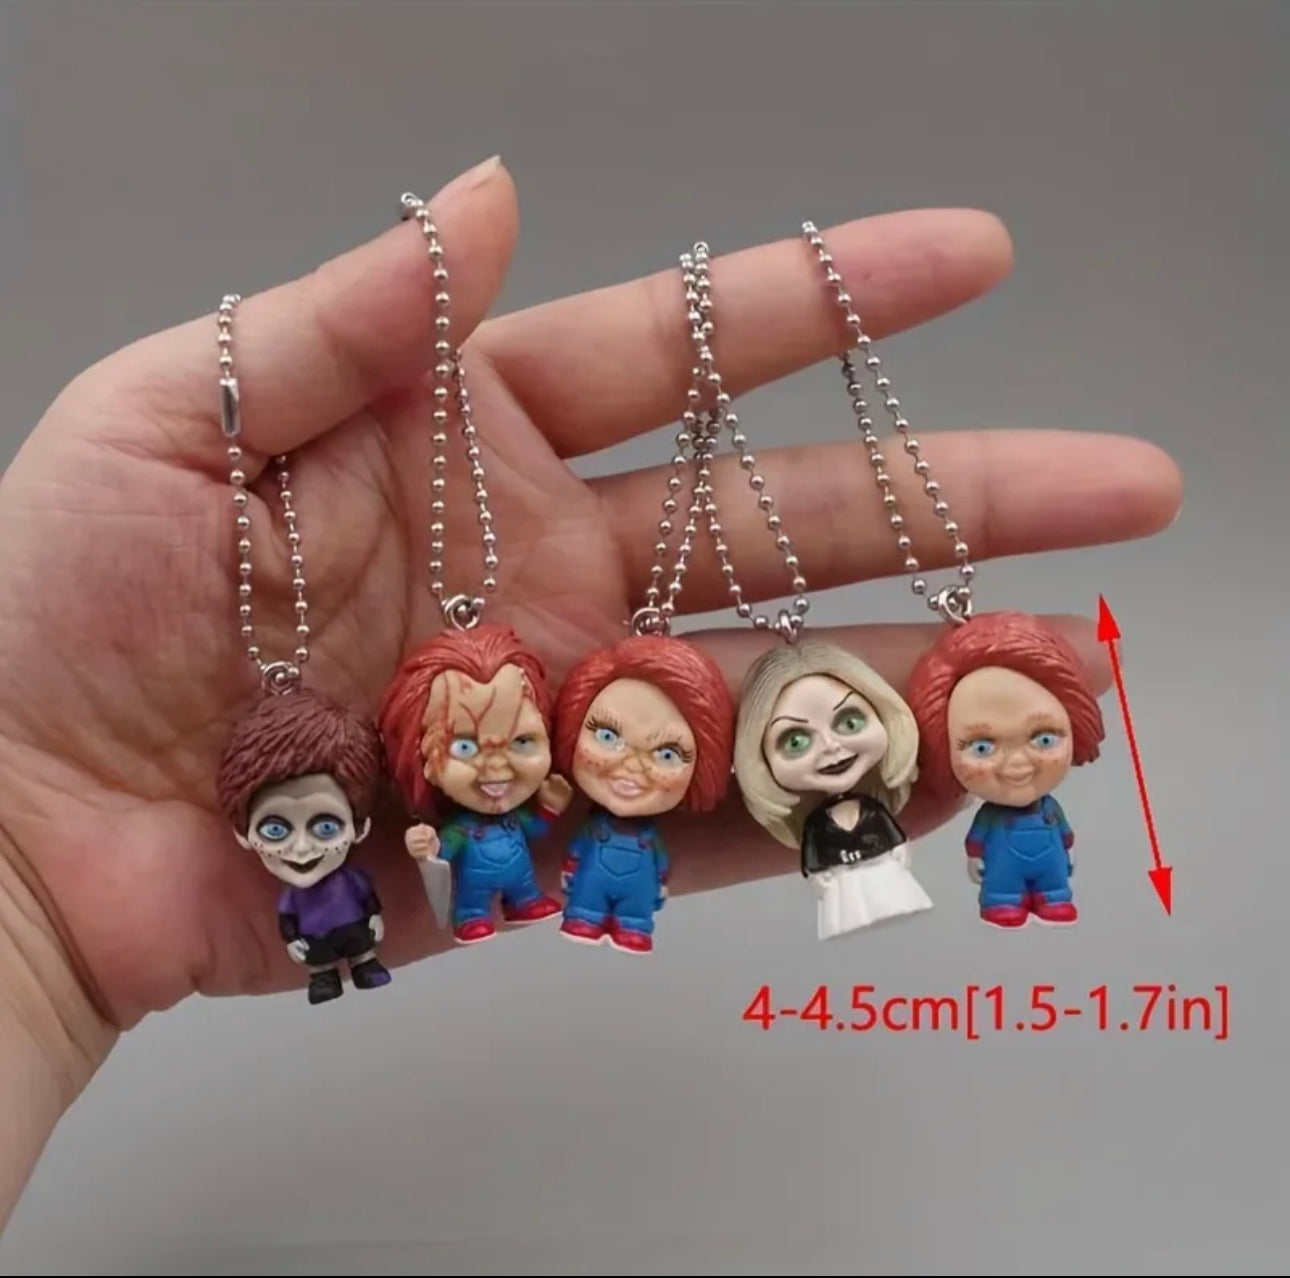 5 Unique Horror Doll Keychains - Add a Touch of Spooky Fun to Your Keys!